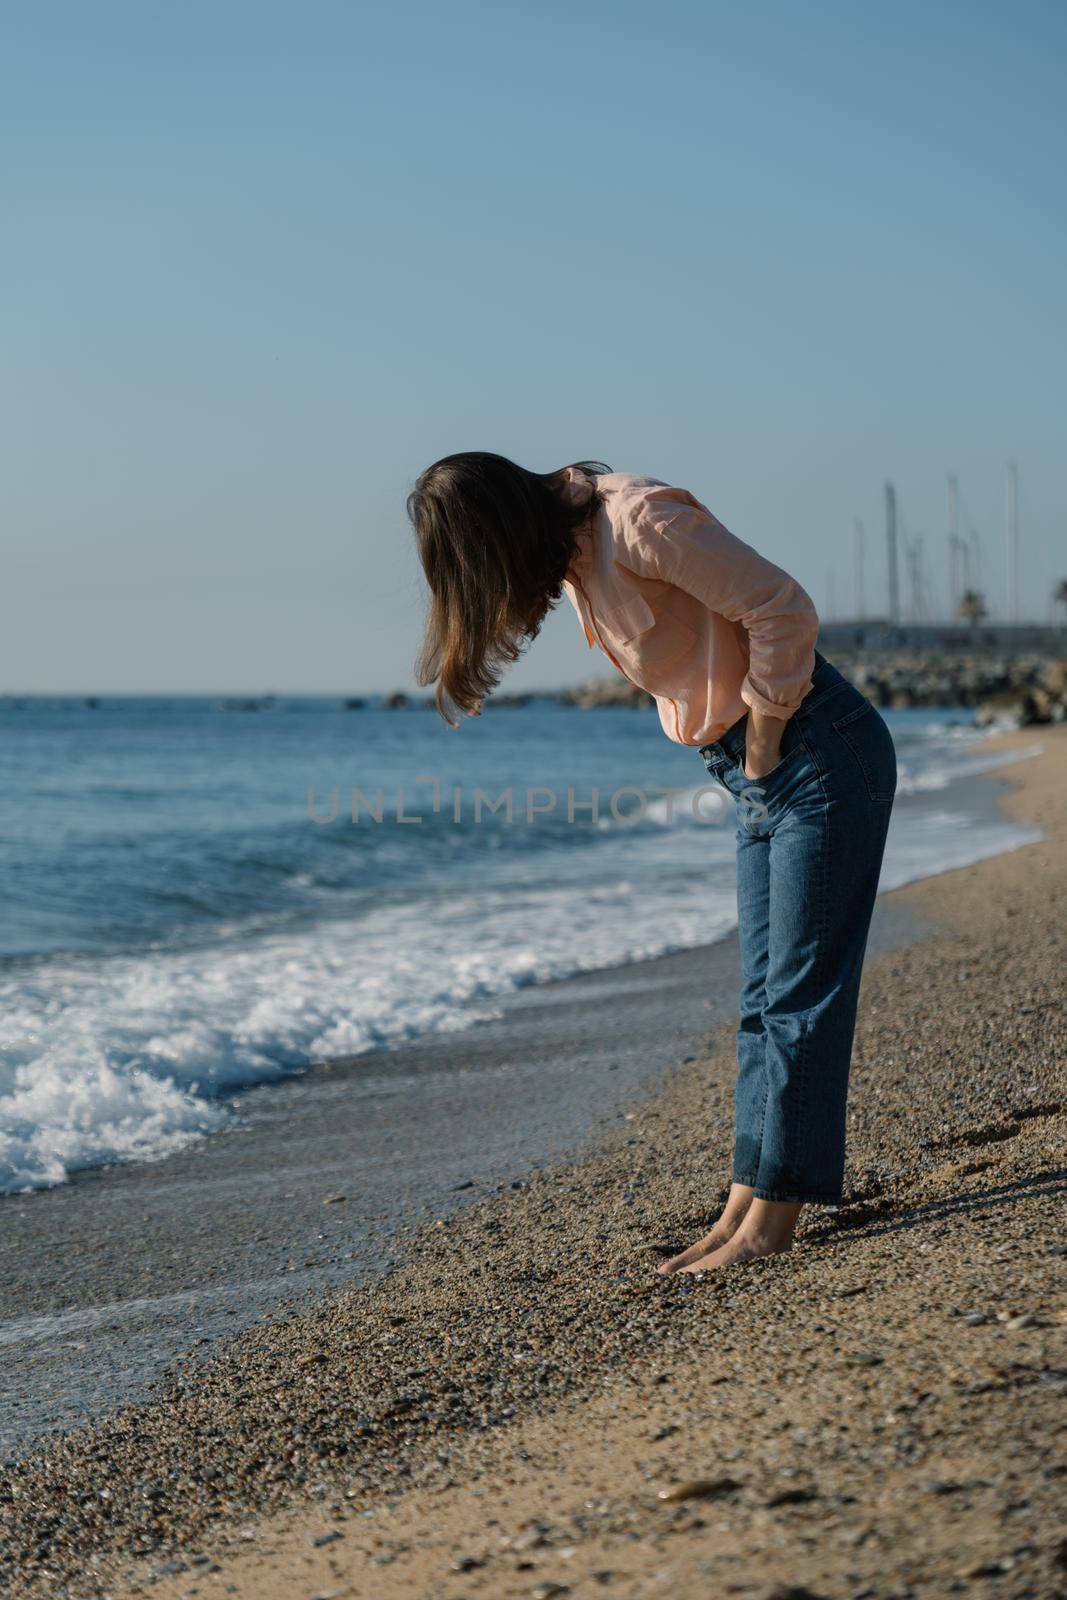 Barefoot woman in pink shirt and blue jeans looks down at her feet on beach by apavlin